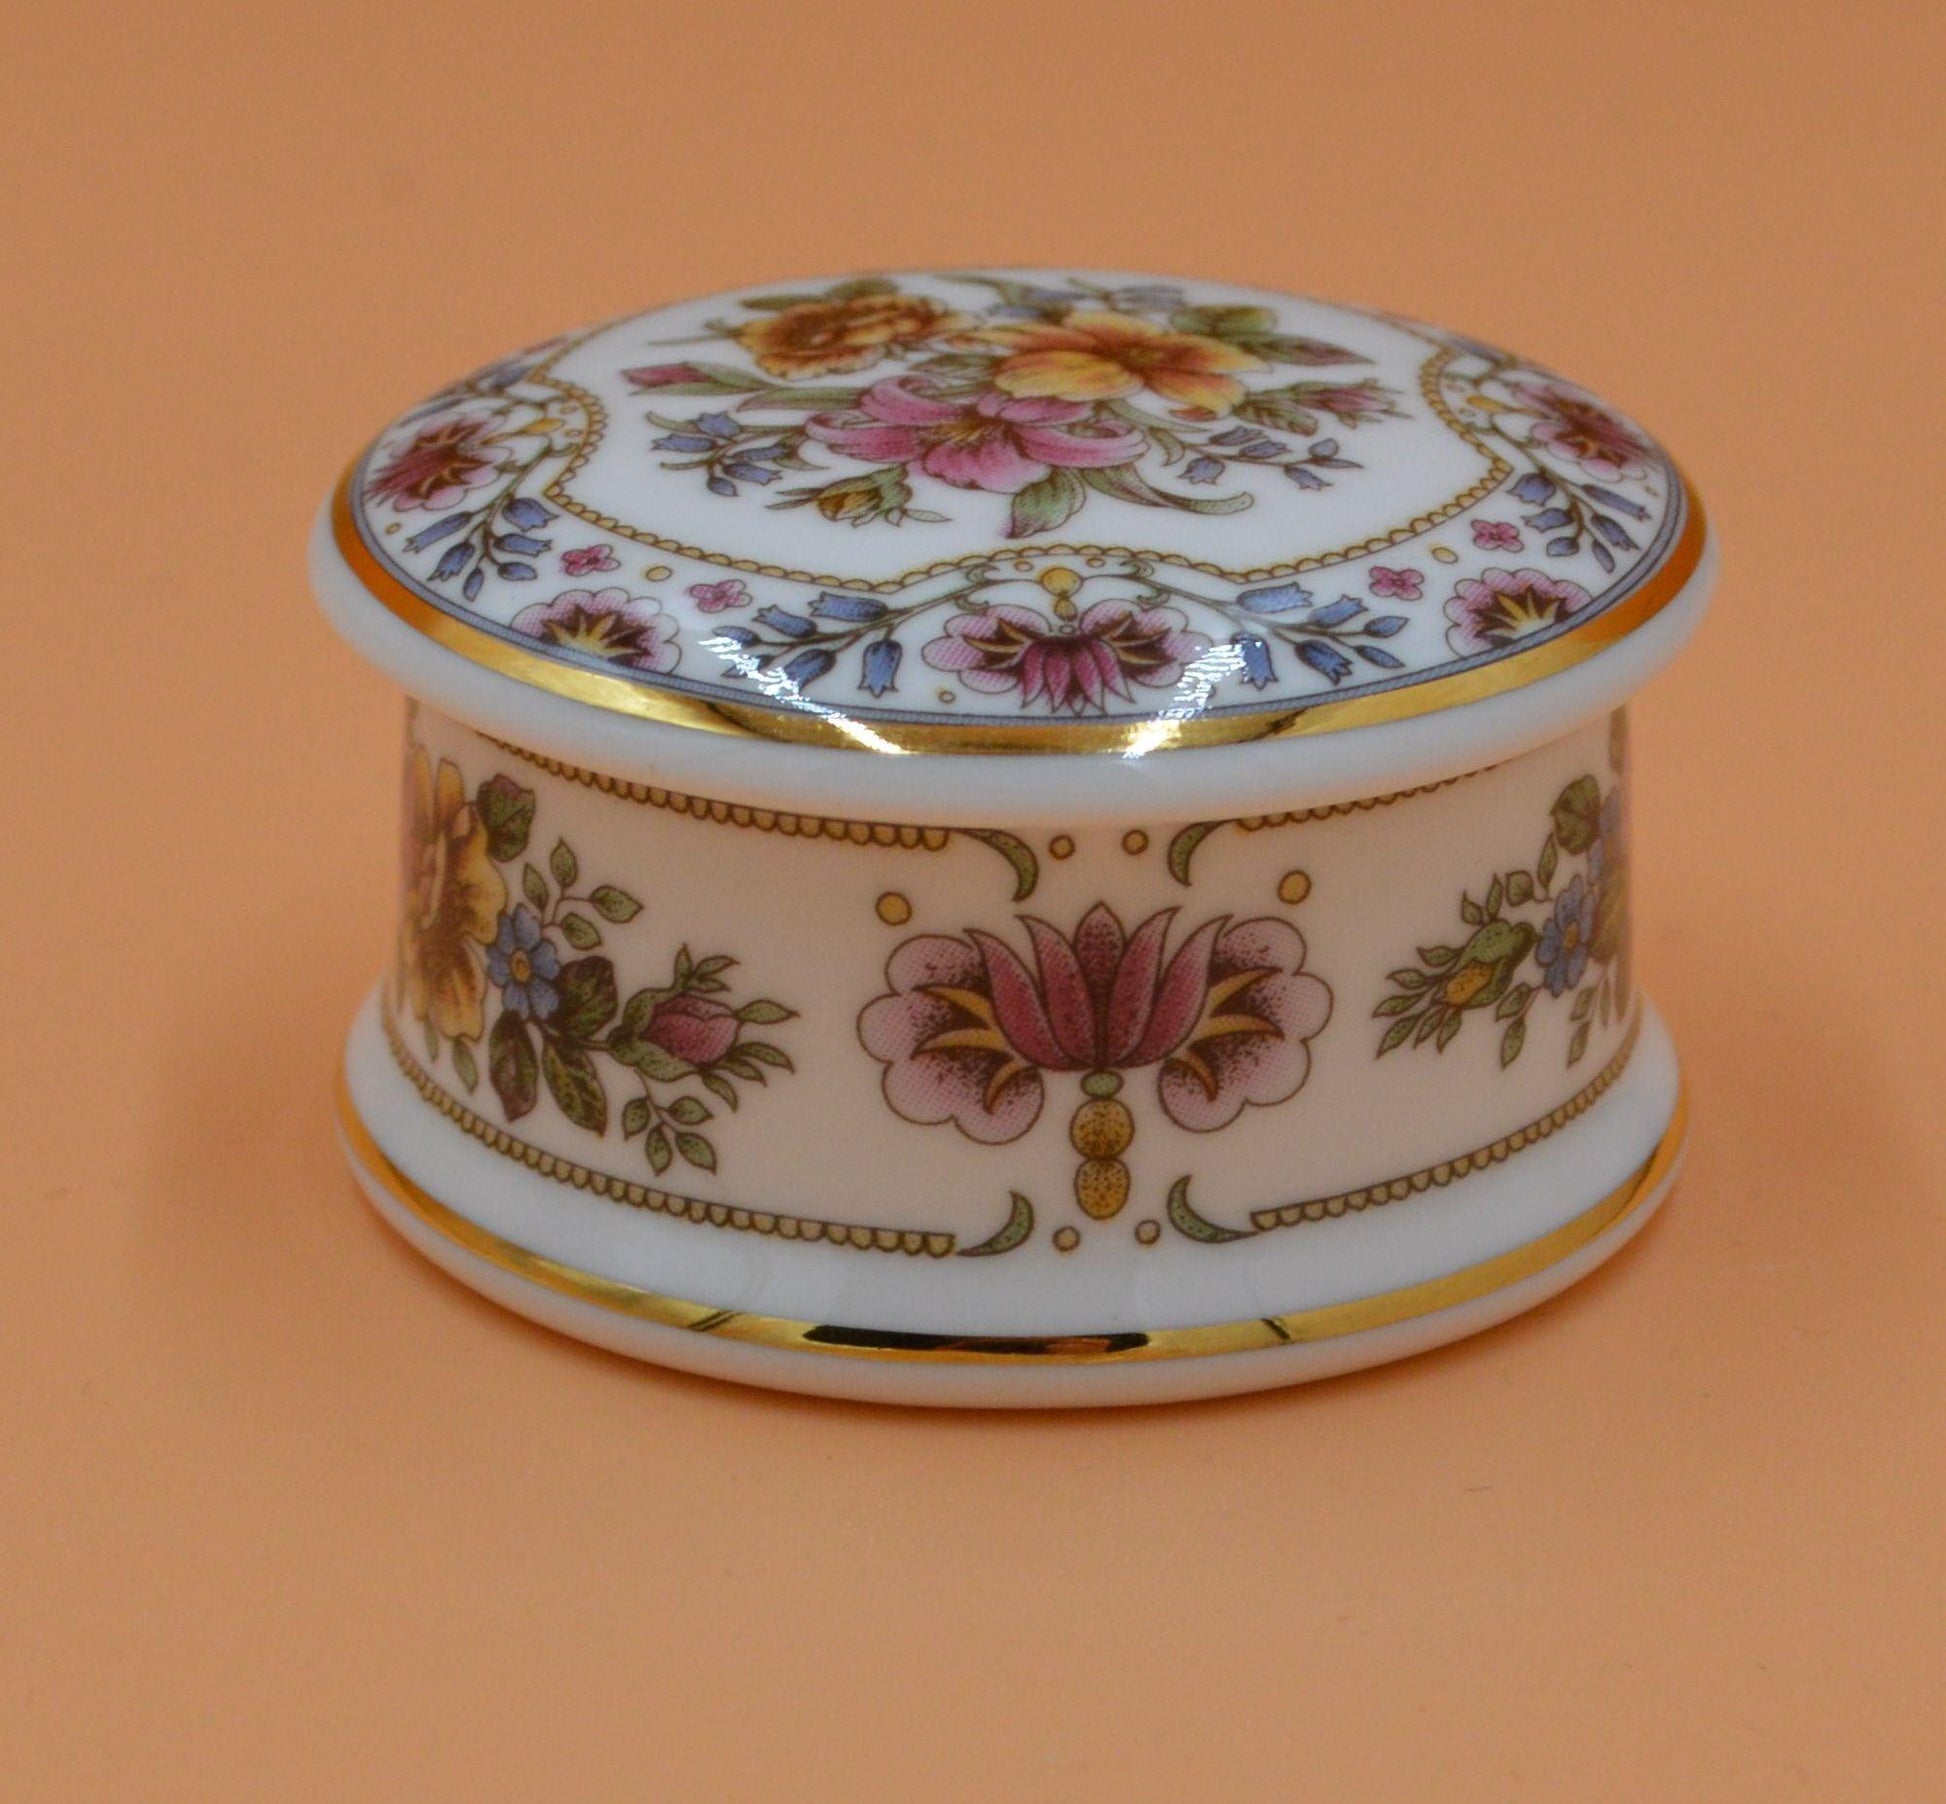 BONE CHINA STAFFORDSHIRE TRINKET POT WHITE WITH FLORAL DESIGN - TMD167207